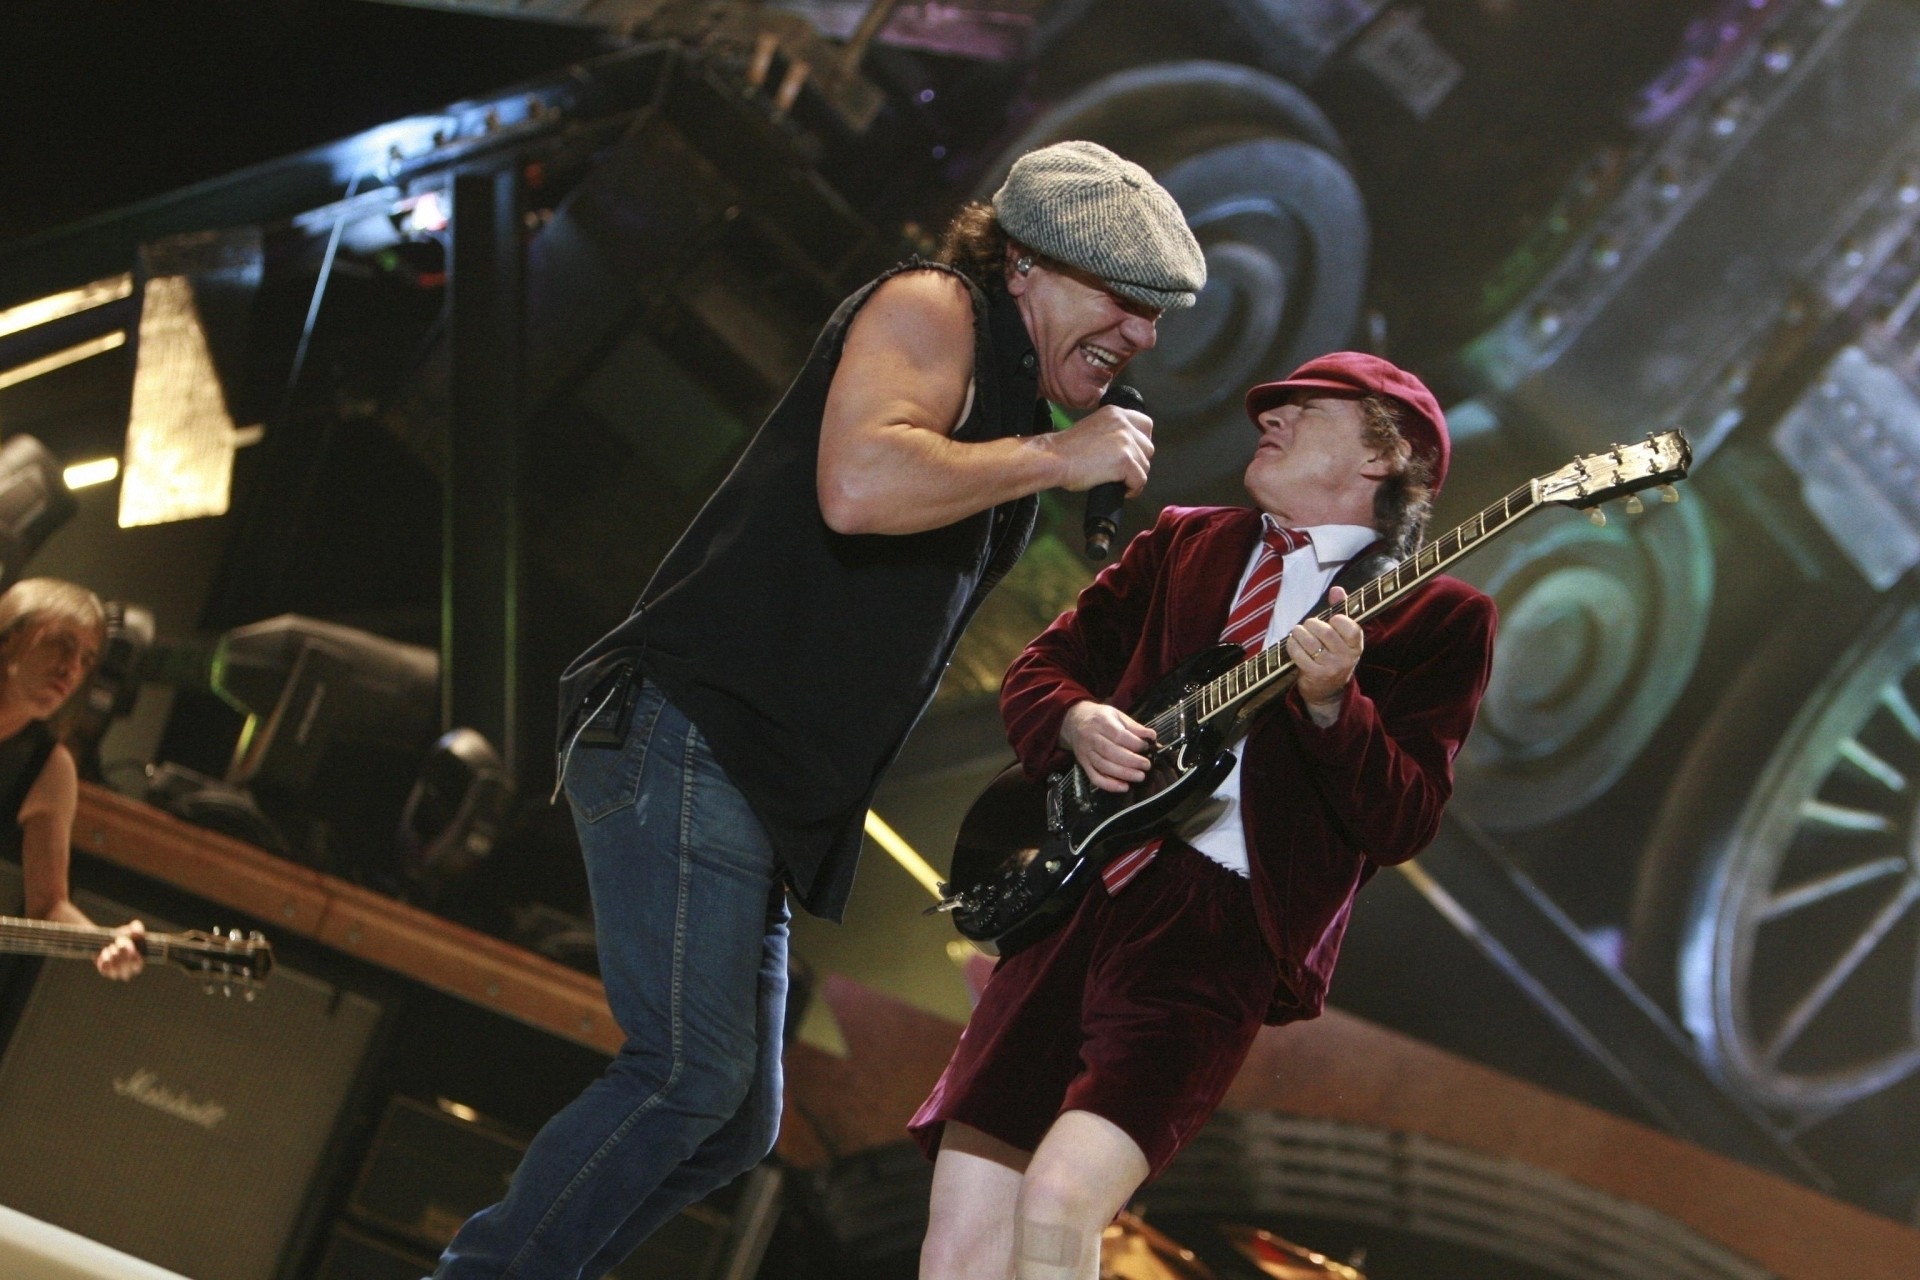 1920x1280 Wallpaper Acdc, Group, Scene, Solo, Guitar-player HD, Picture, Image